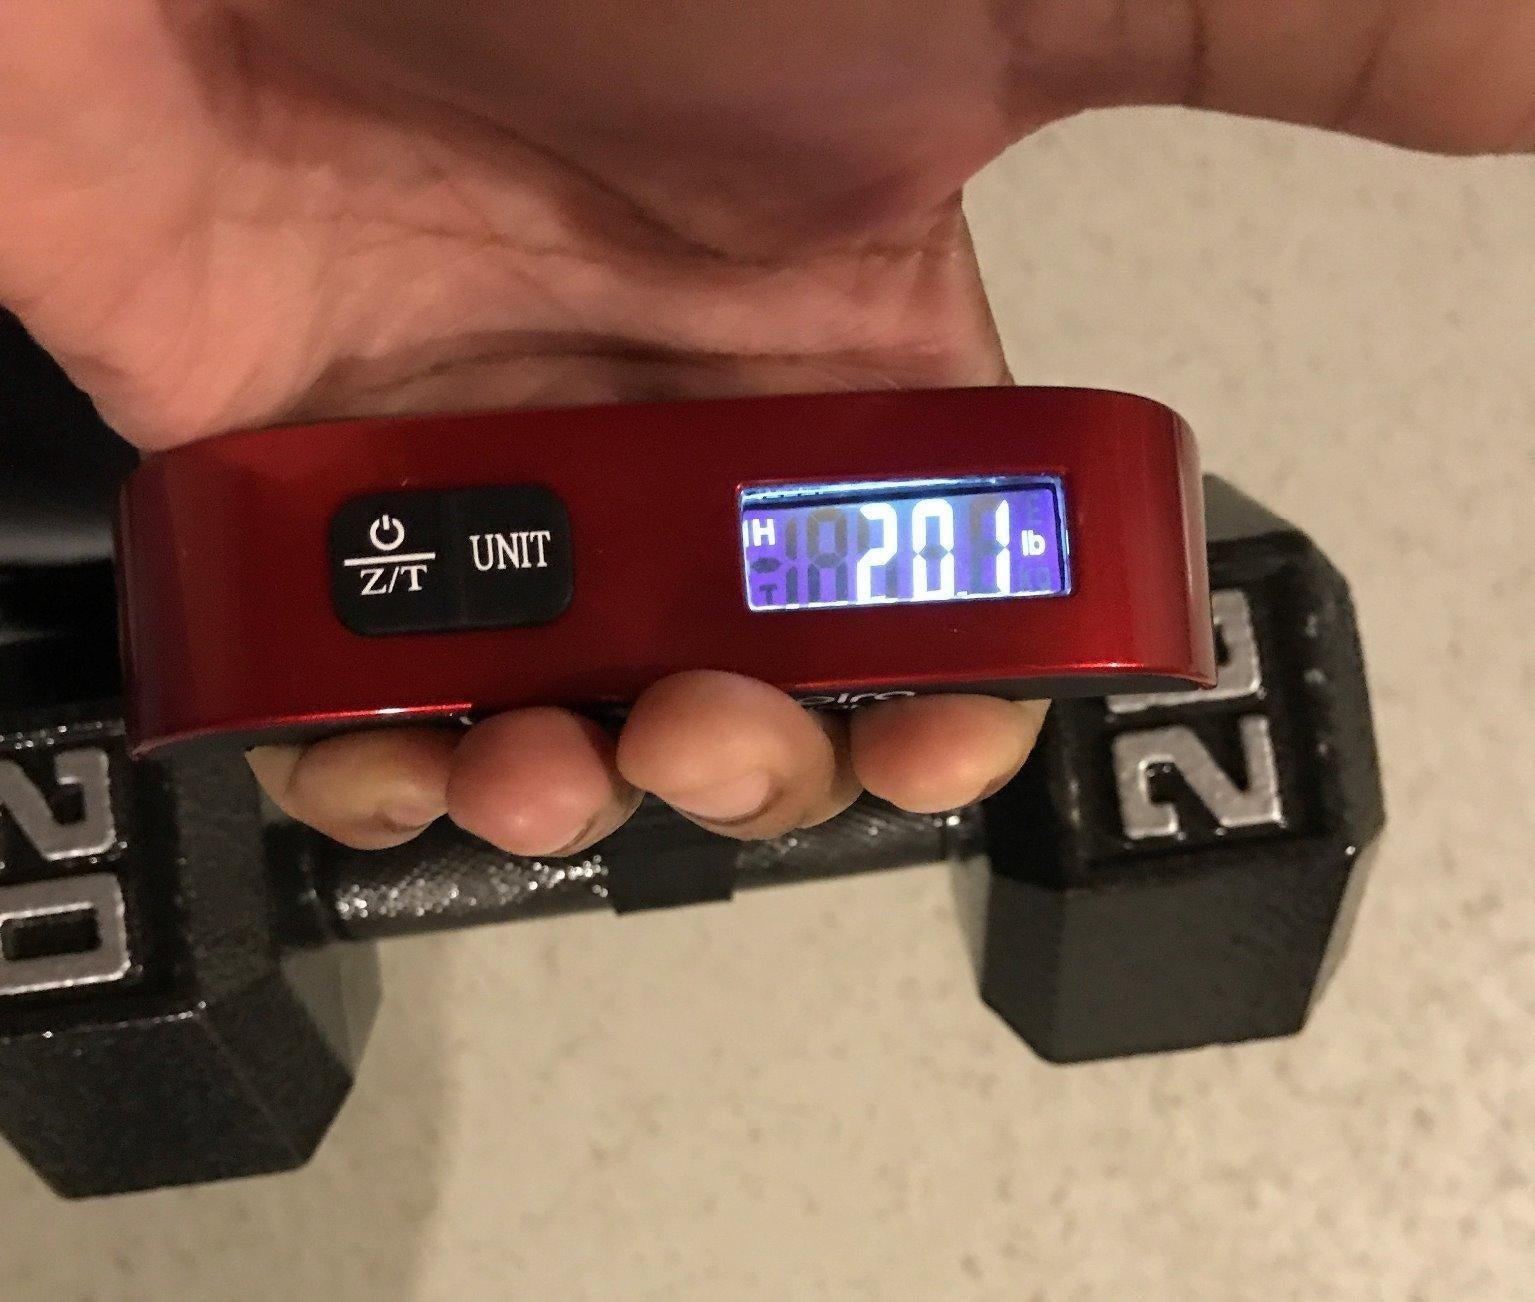 Reviewer photo of them holding the scale and 20 pound dumbbell to show it's accurate